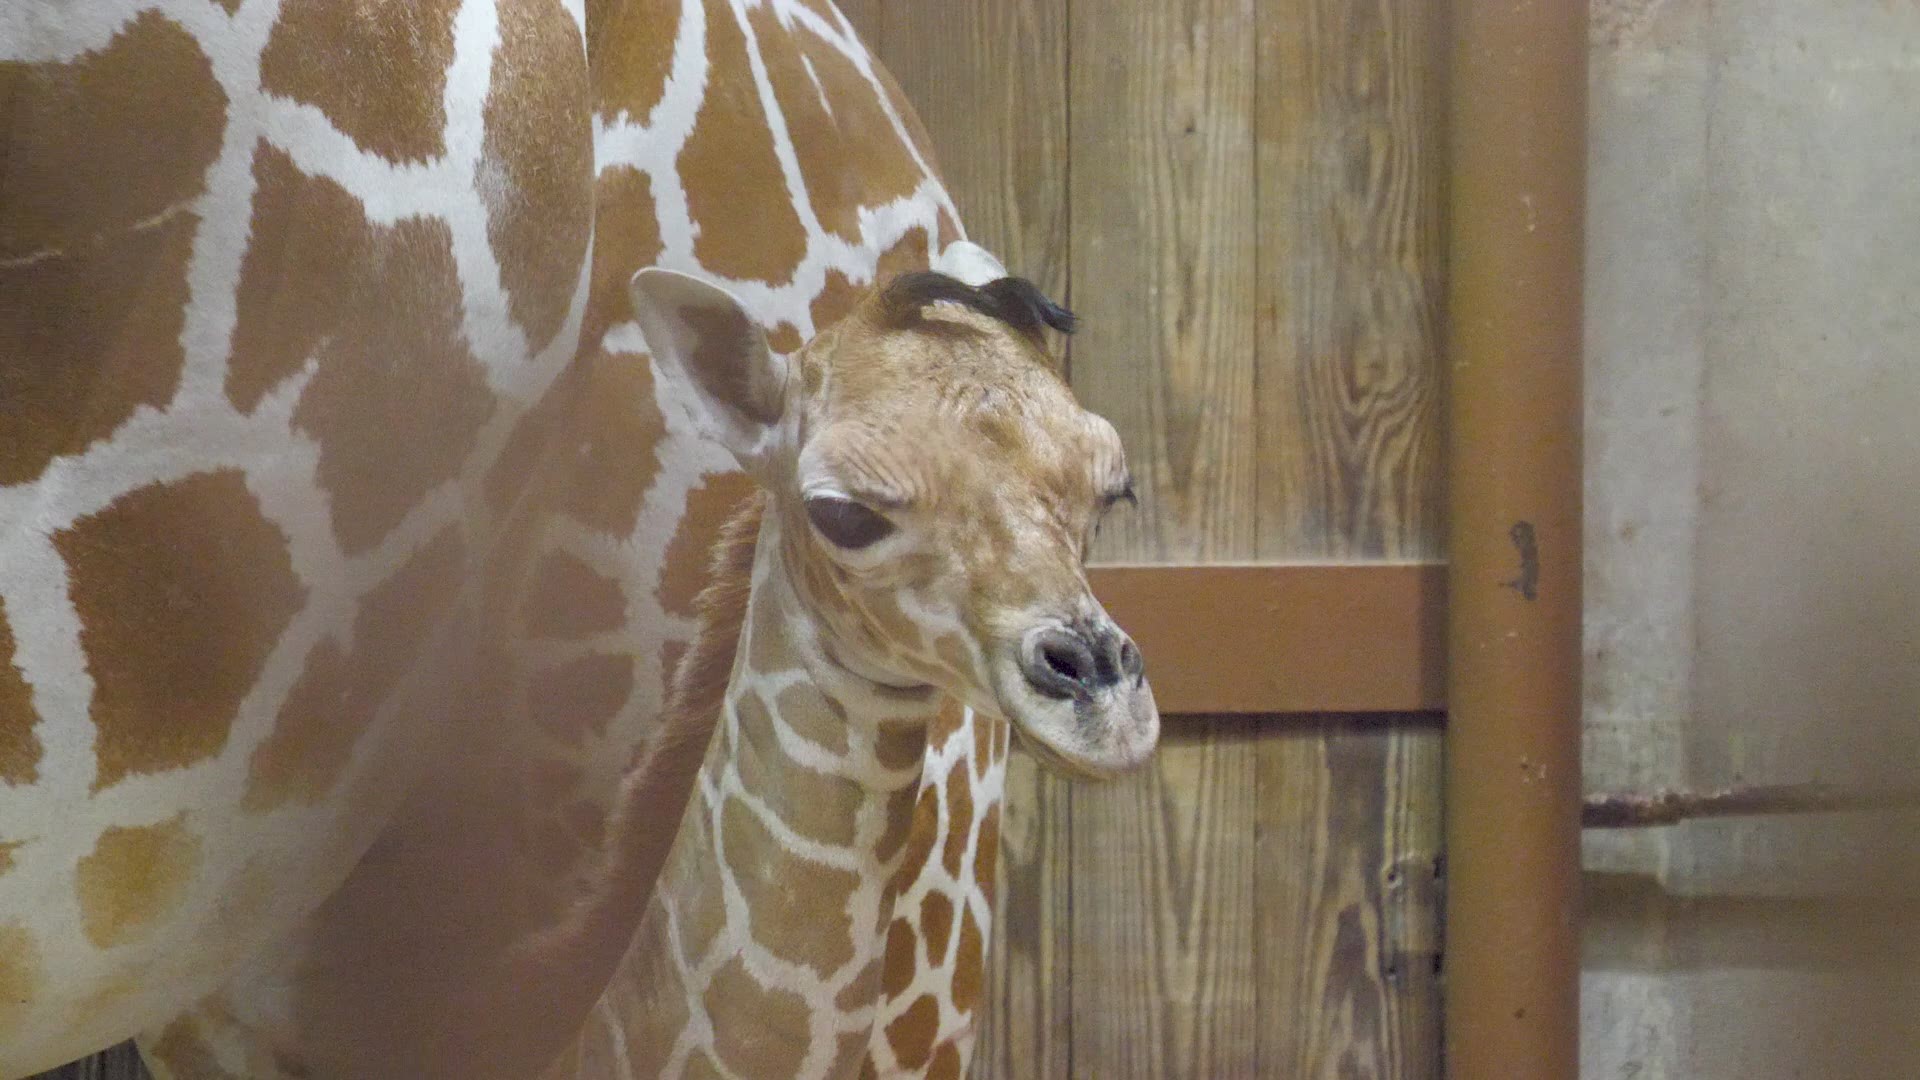 Zookeepers said mom Wendy gave birth to the baby girl Monday, June 7th.